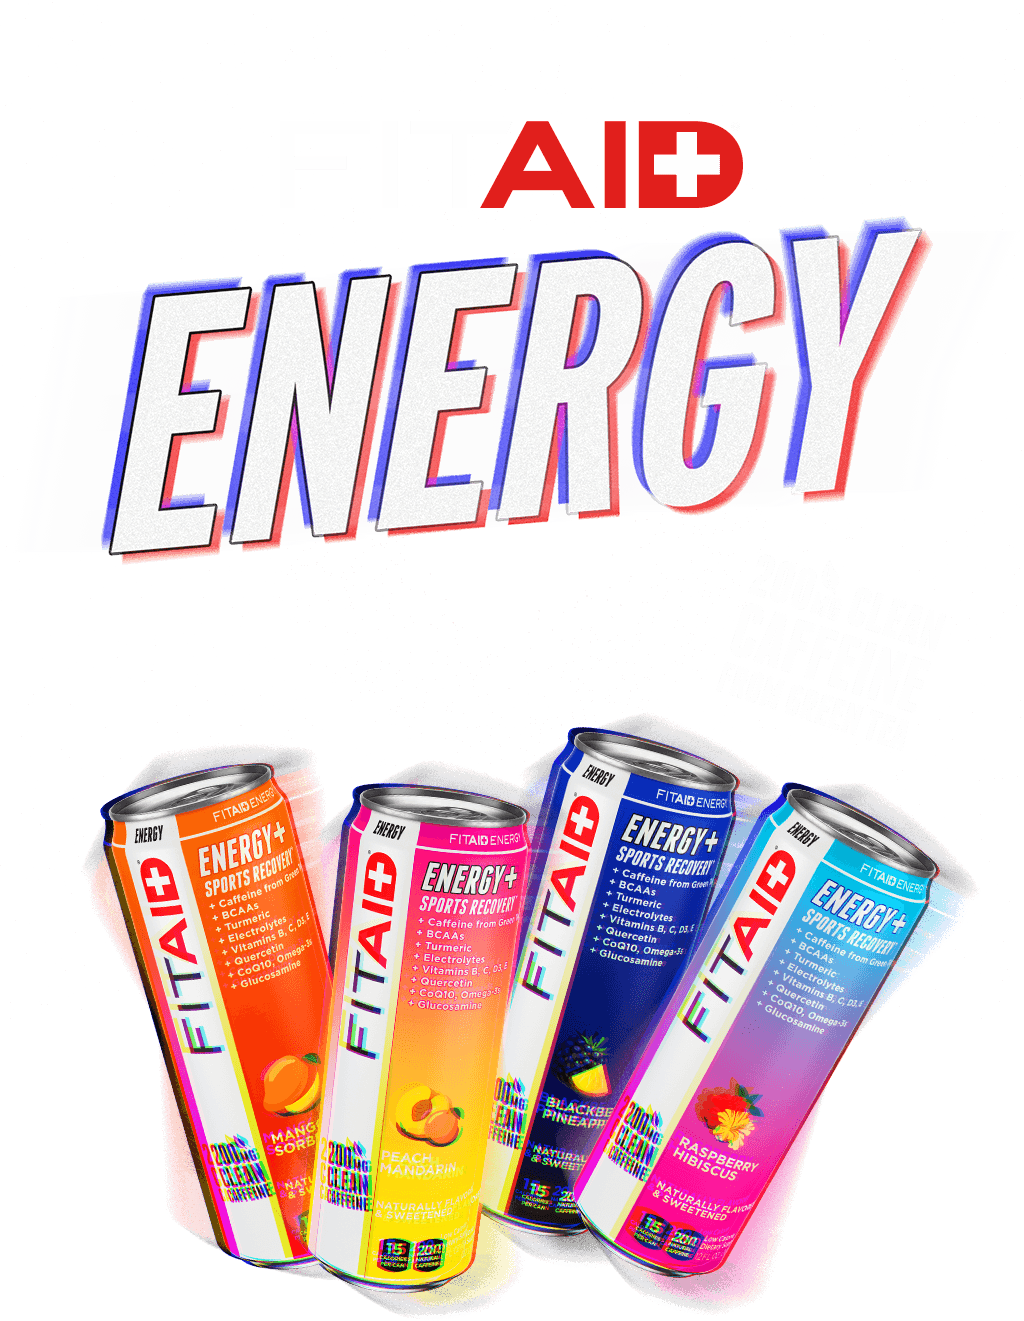 NEW! FITAID Energy Launch Exclusive!